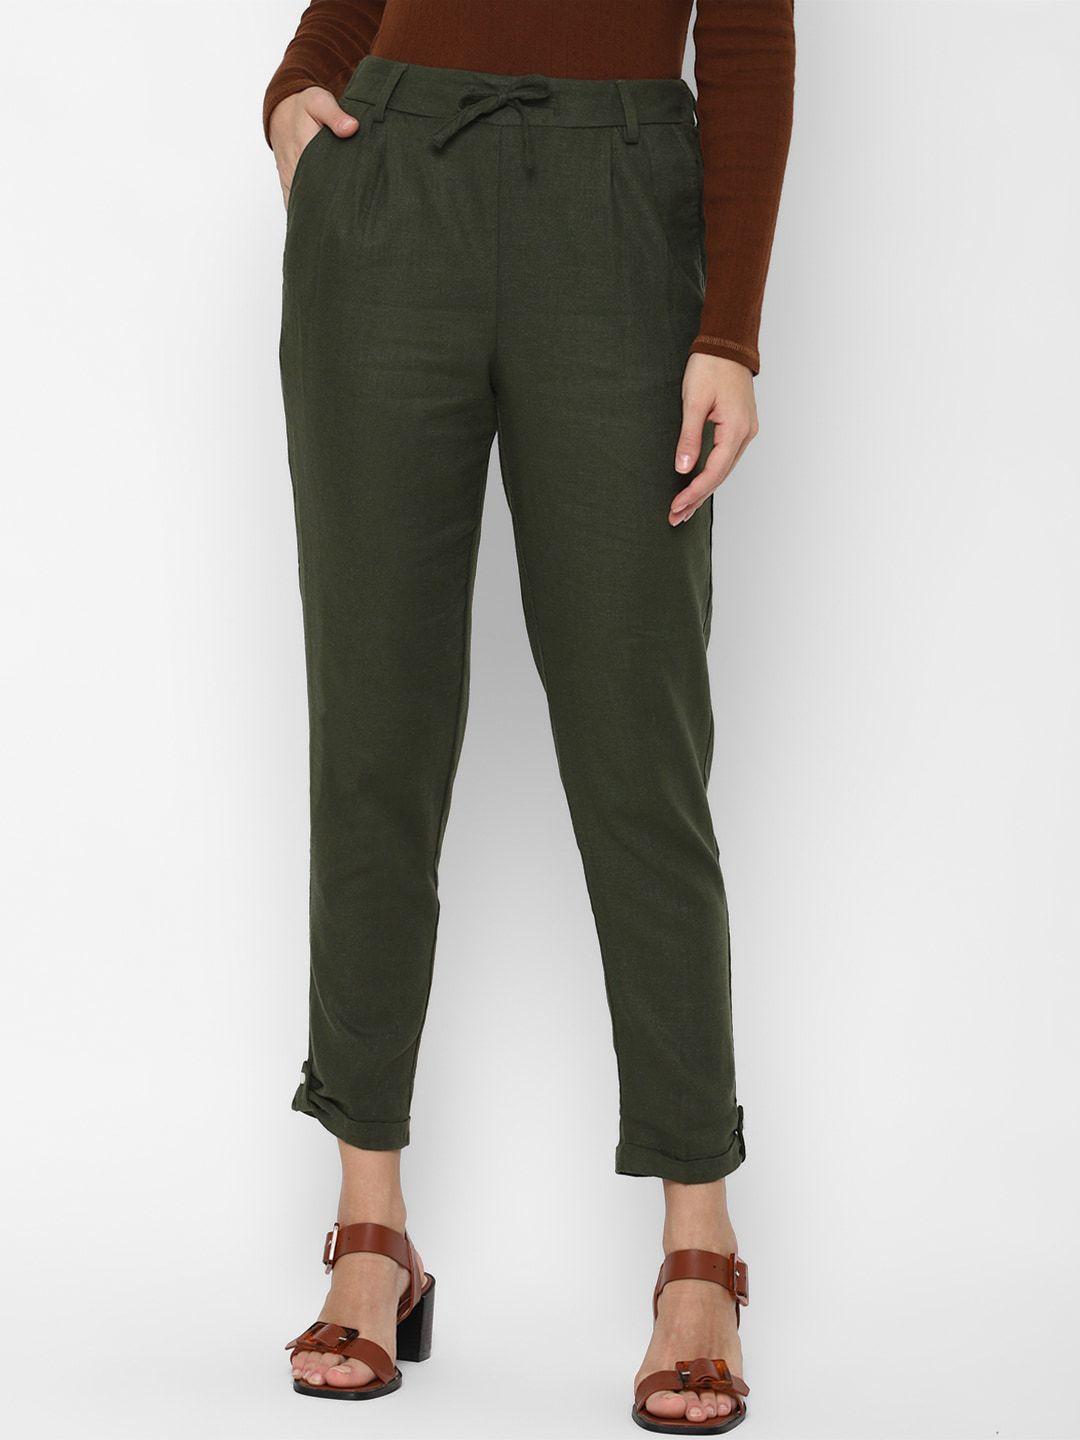 allen solly woman olive regular fit cropped peg trousers